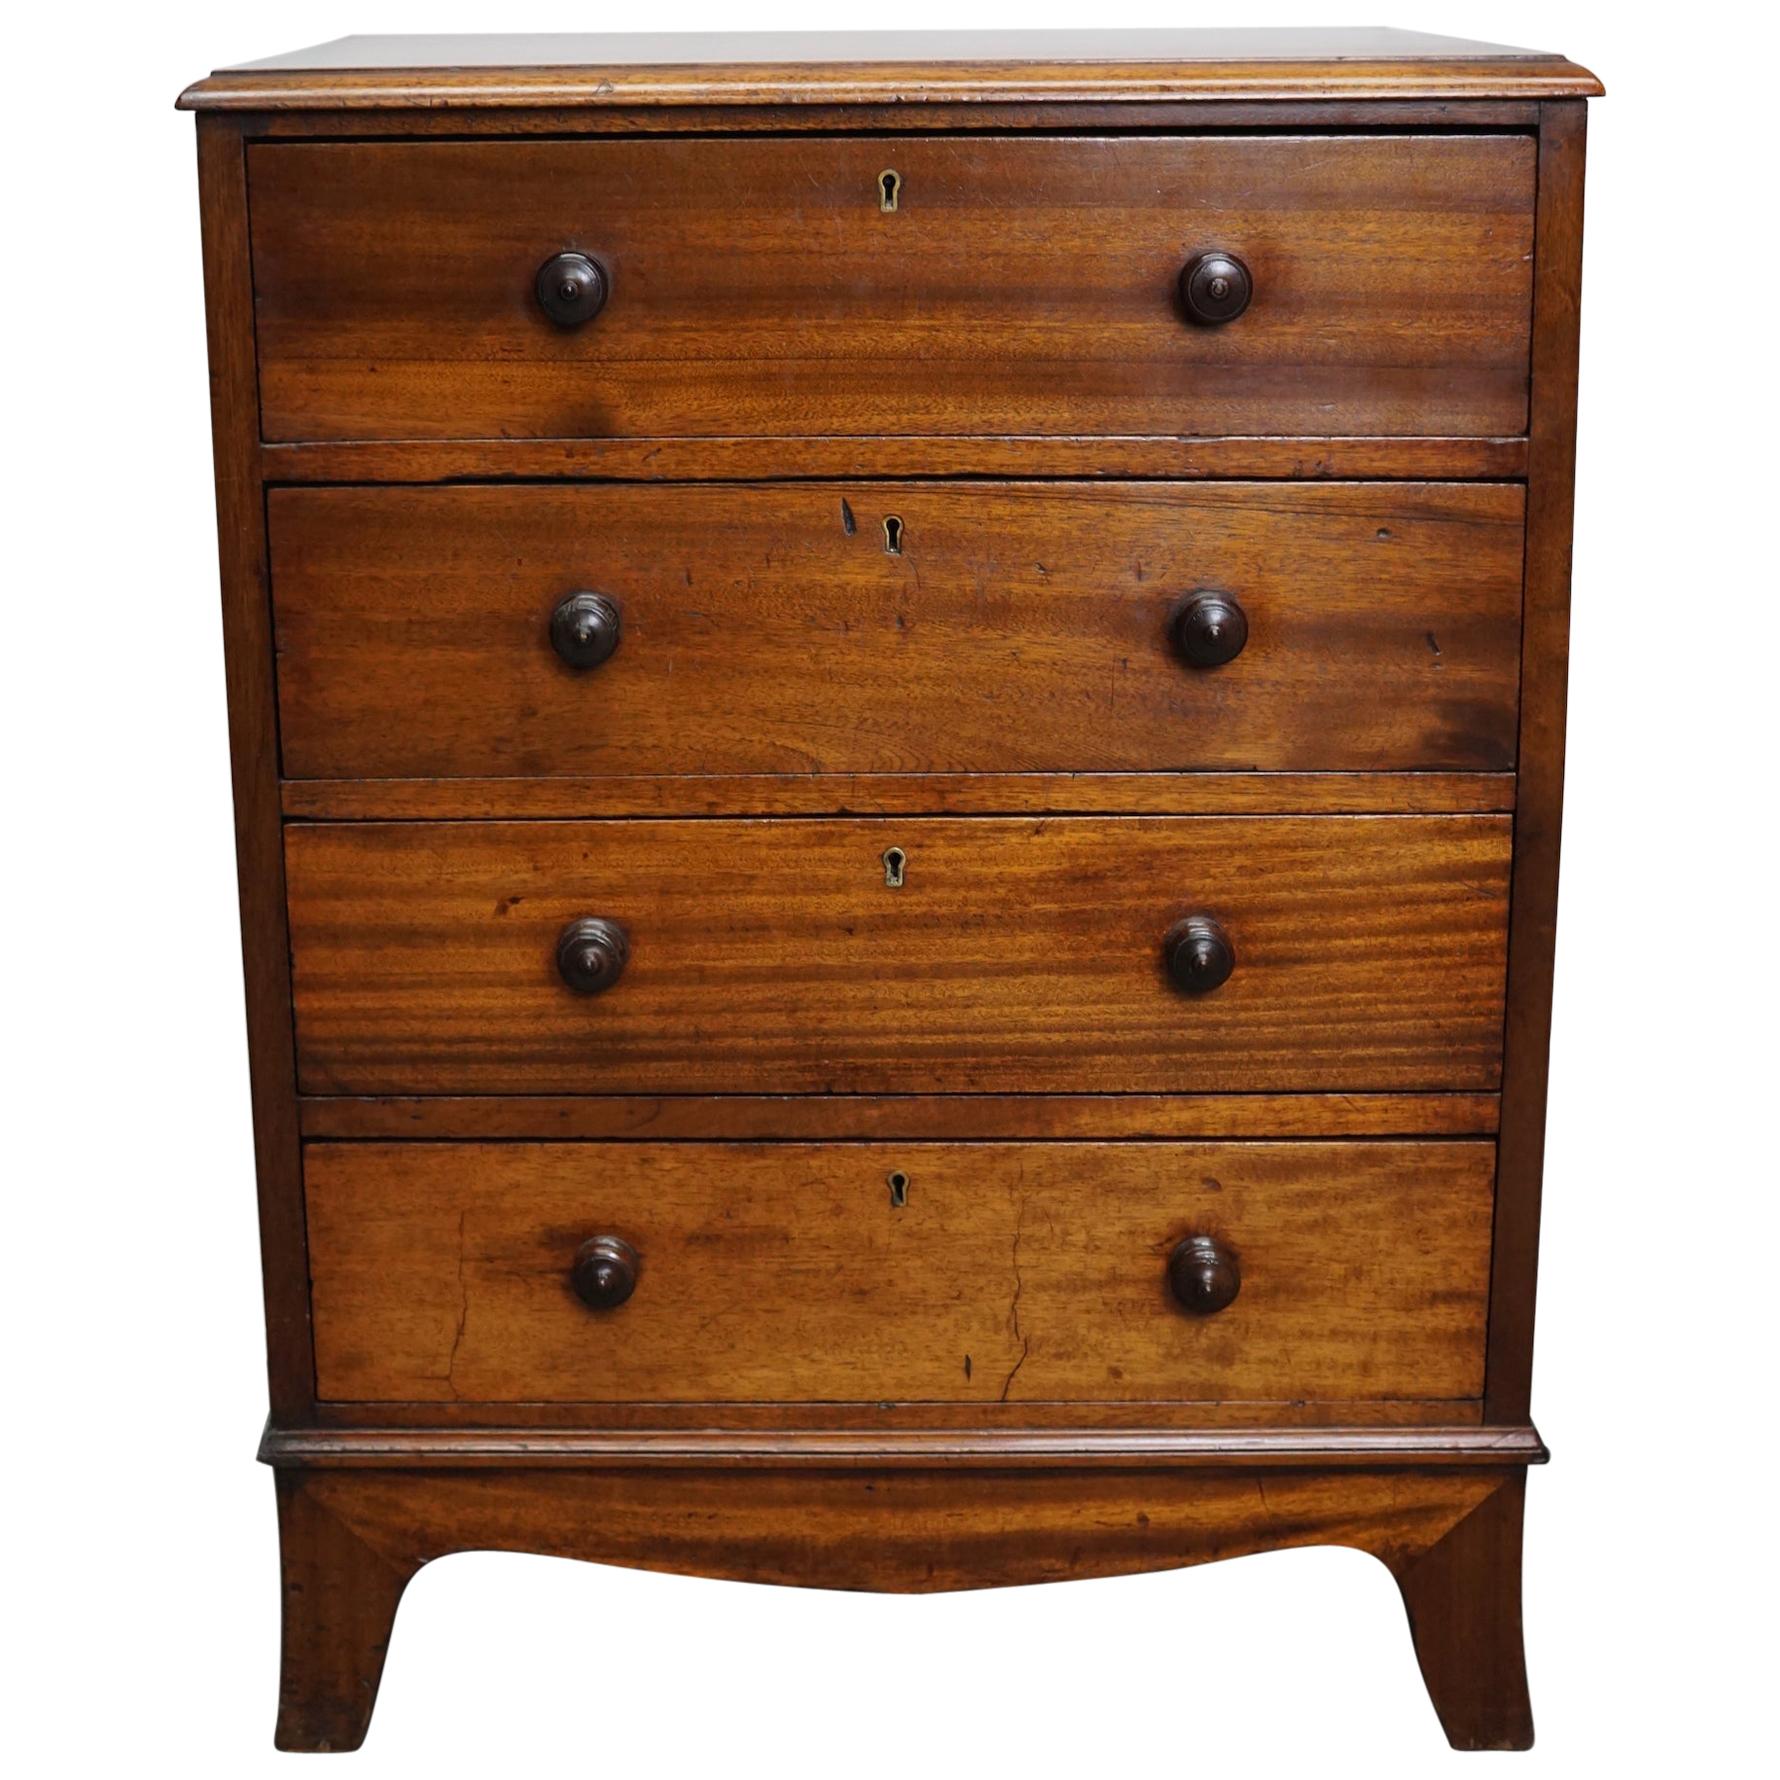 Late Victorian English Mahogany Chest of Drawers, Late 19th Century